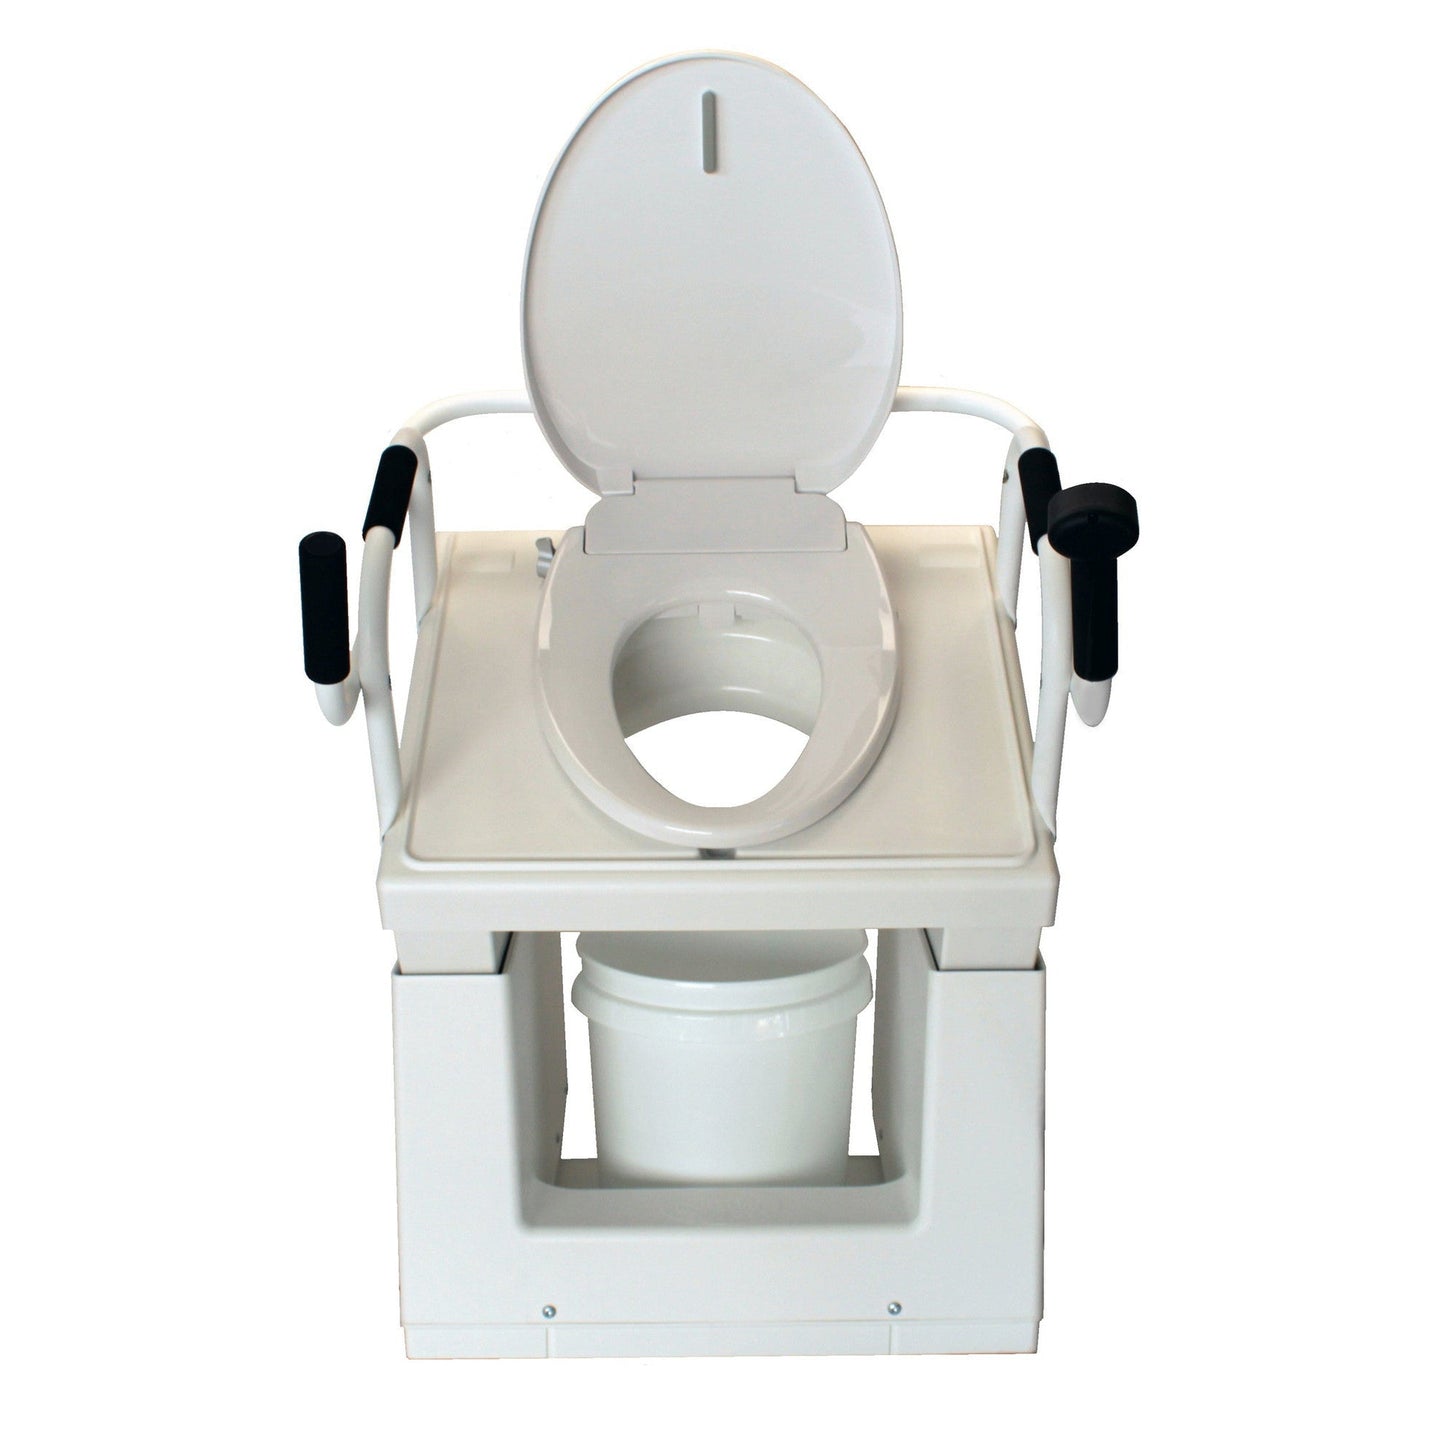 Throne Buttler 37" Powered Bedside Toilet Lift With 26" Standard Handle Bar, Upgraded Soft Close Toilet Seat and Commode Conversion Kit